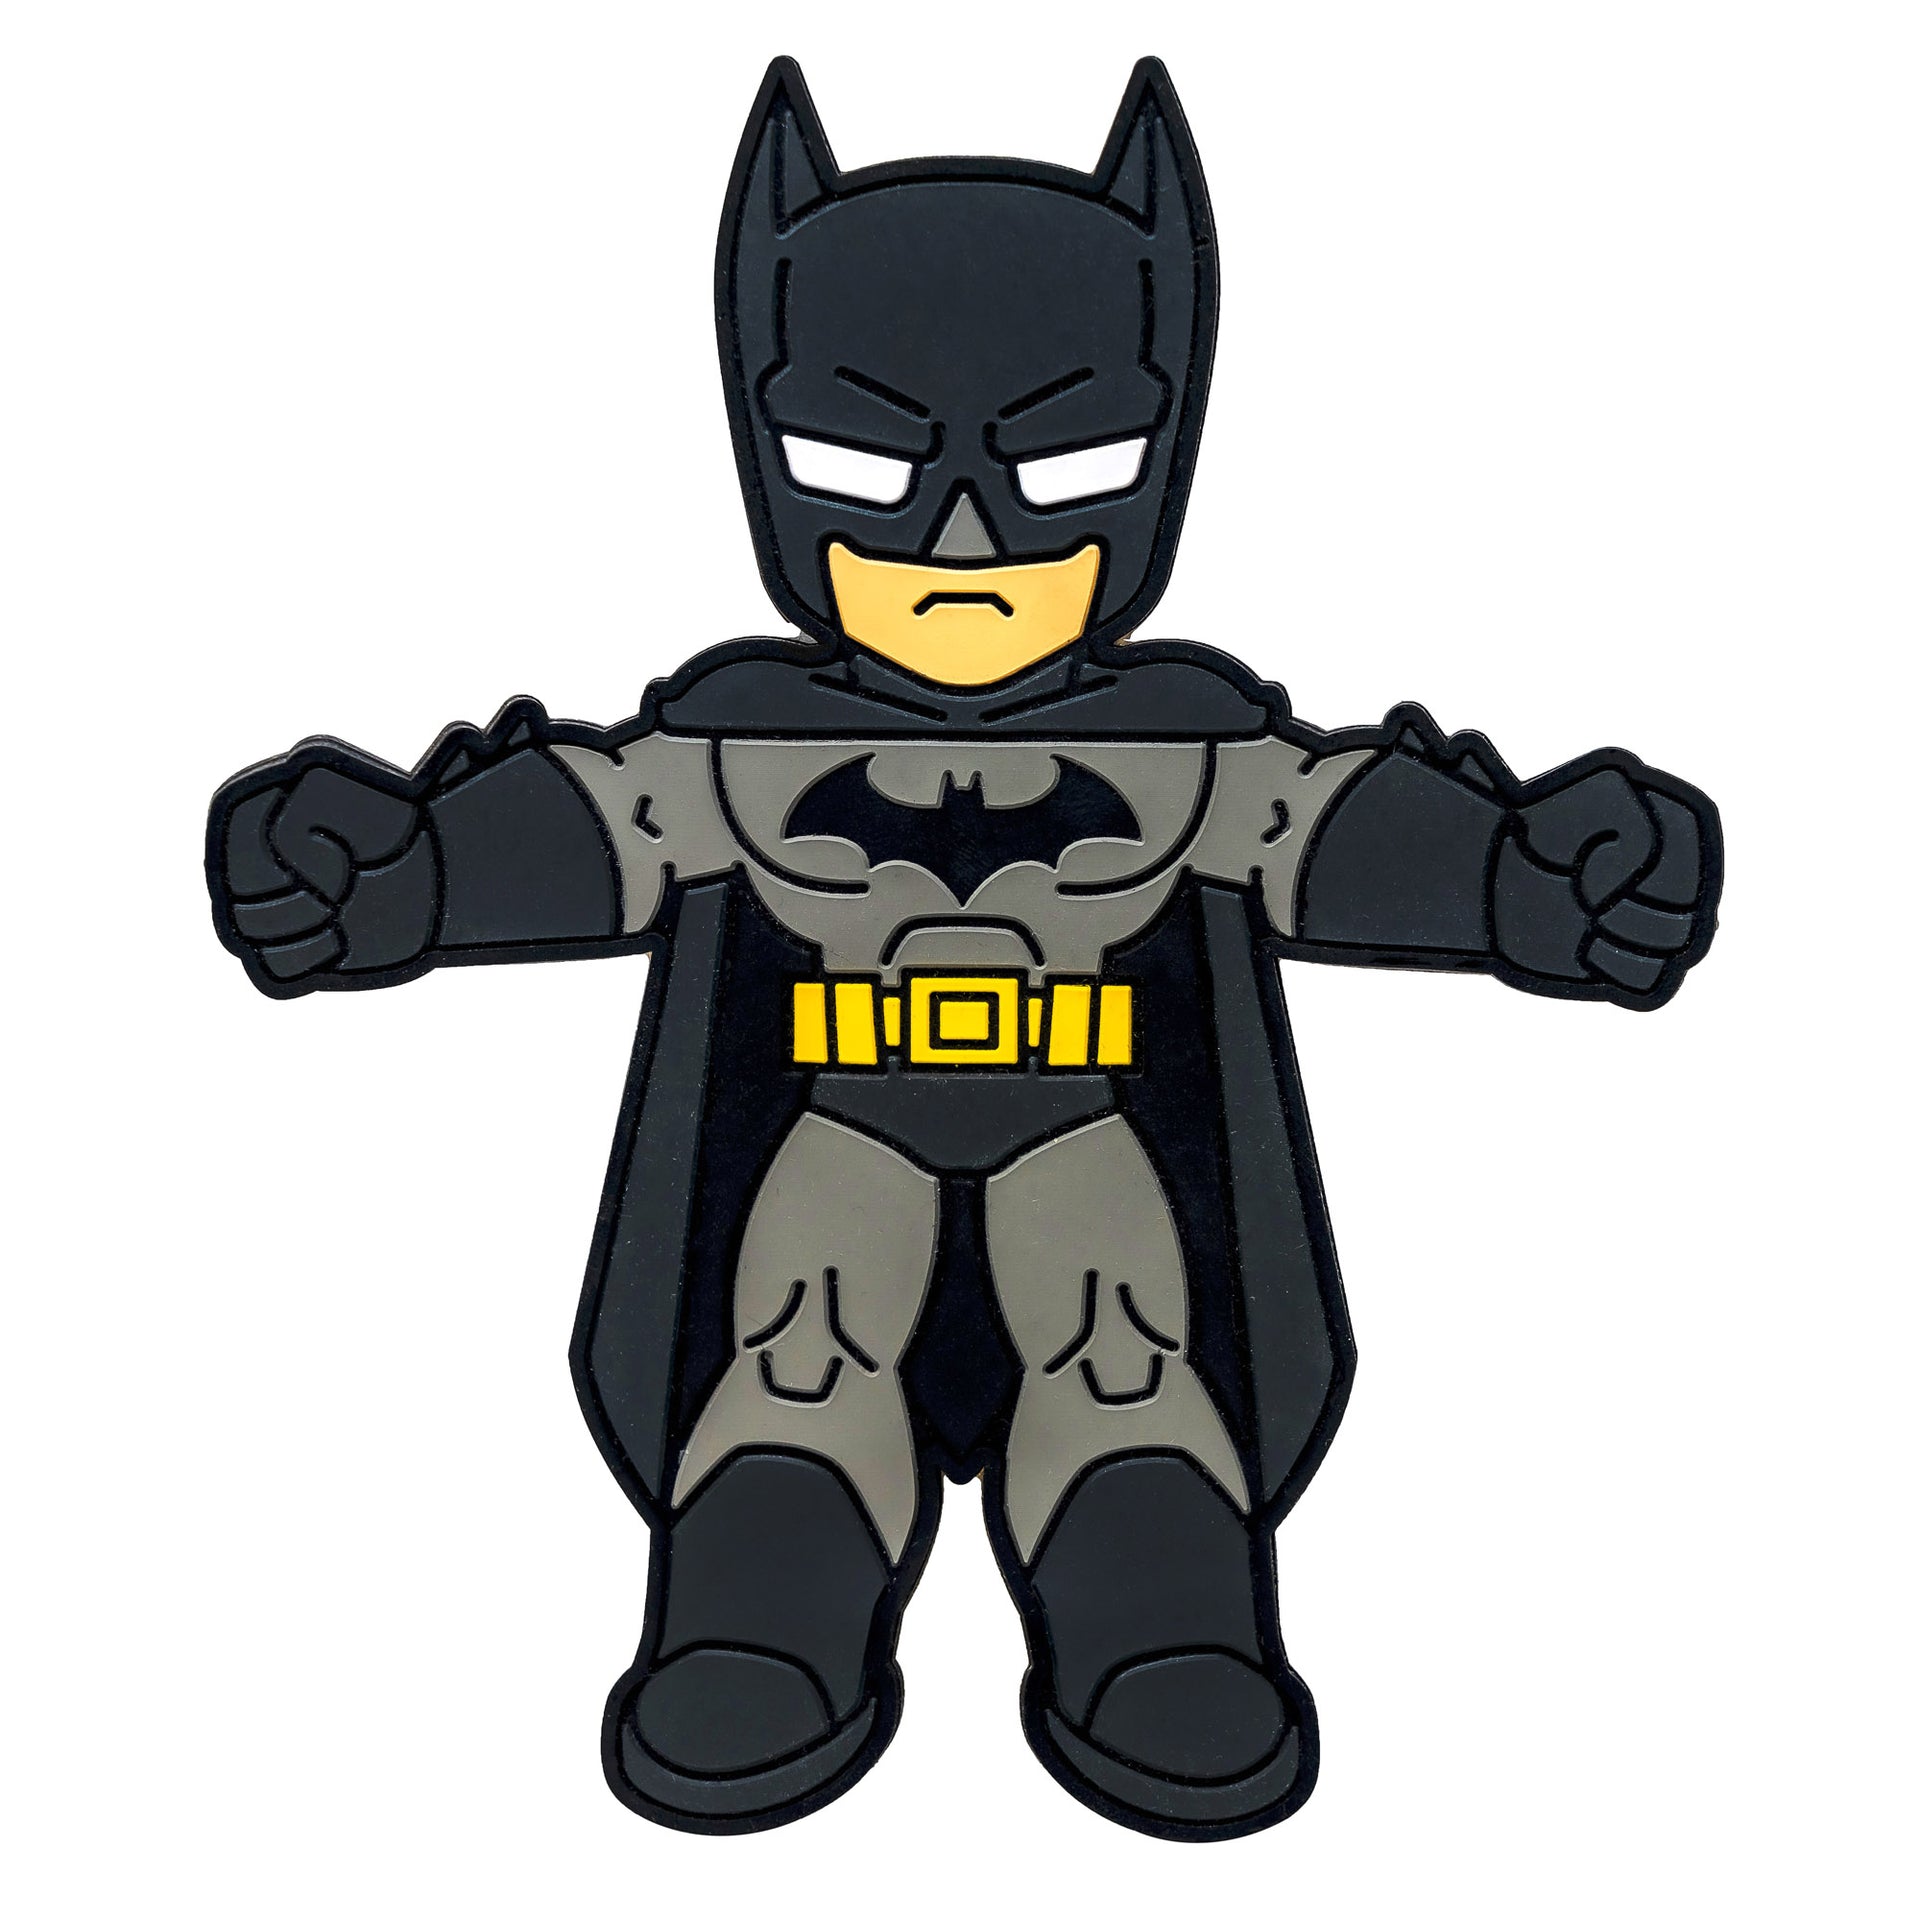 Image of Batman Hug Buddy on a white background with arms and legs spread open.